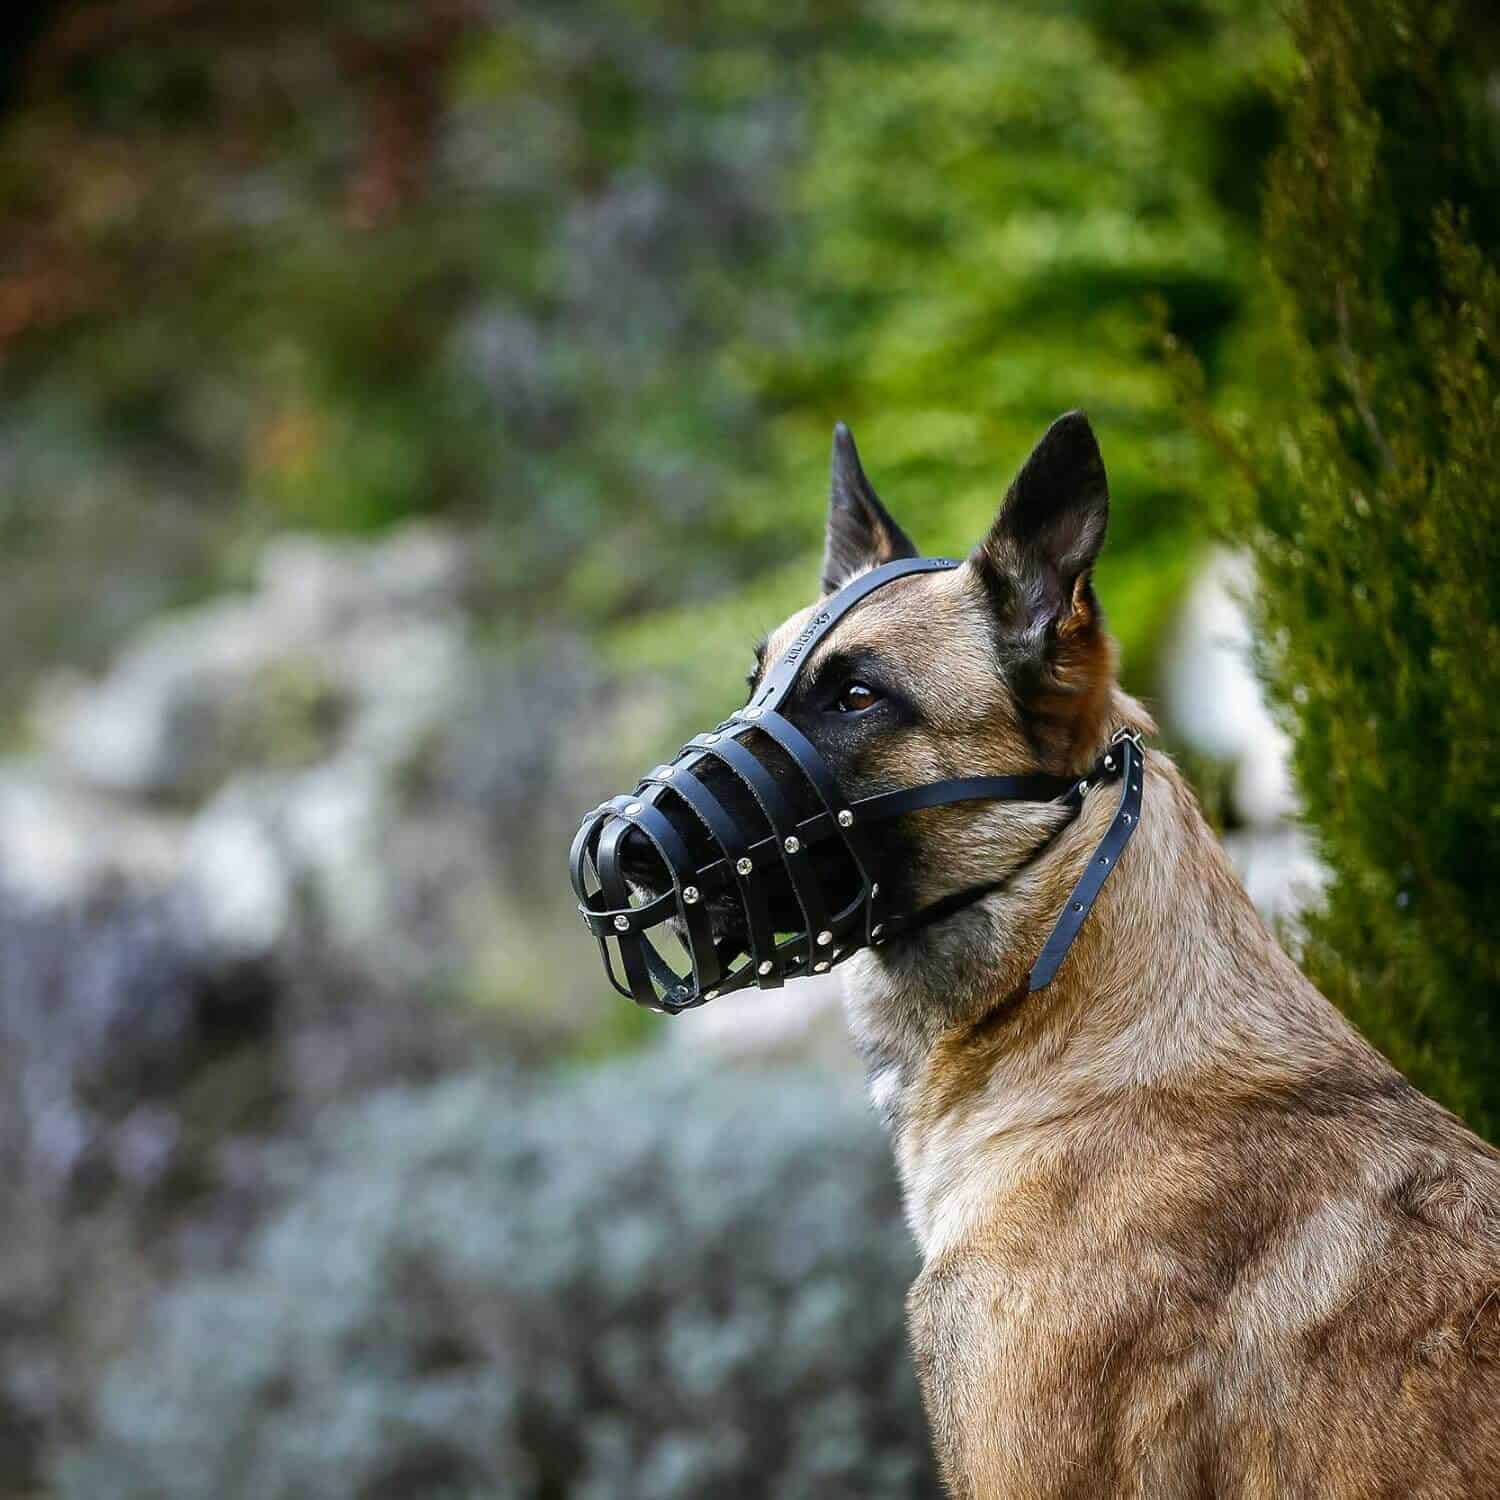 Rubber Belgian Malinois Bite Ball with Strong String for Small Dogs :  Belgian Malinois Breed: Dog Harness, Belgian Malinois dog muzzle, Belgian  Malinois dog collar, Dog leash